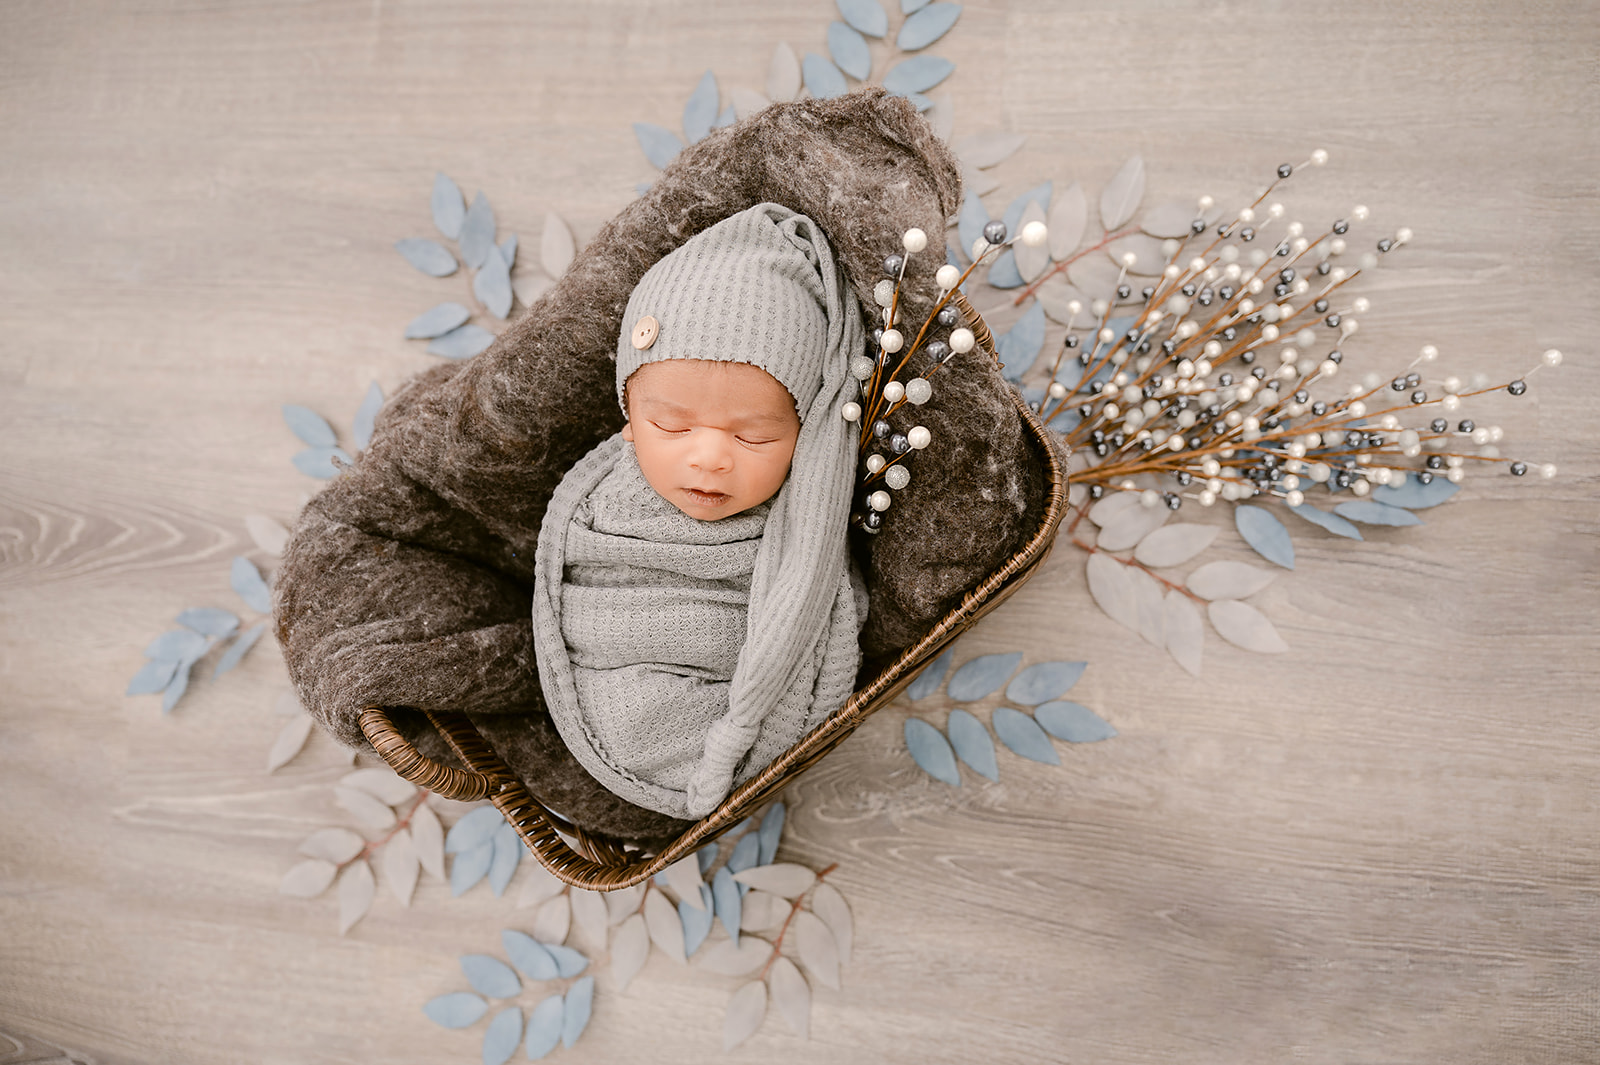 | Princeton MN Newborn Photography Studio | Safety Certified Newborn Photographer with 10 years experience